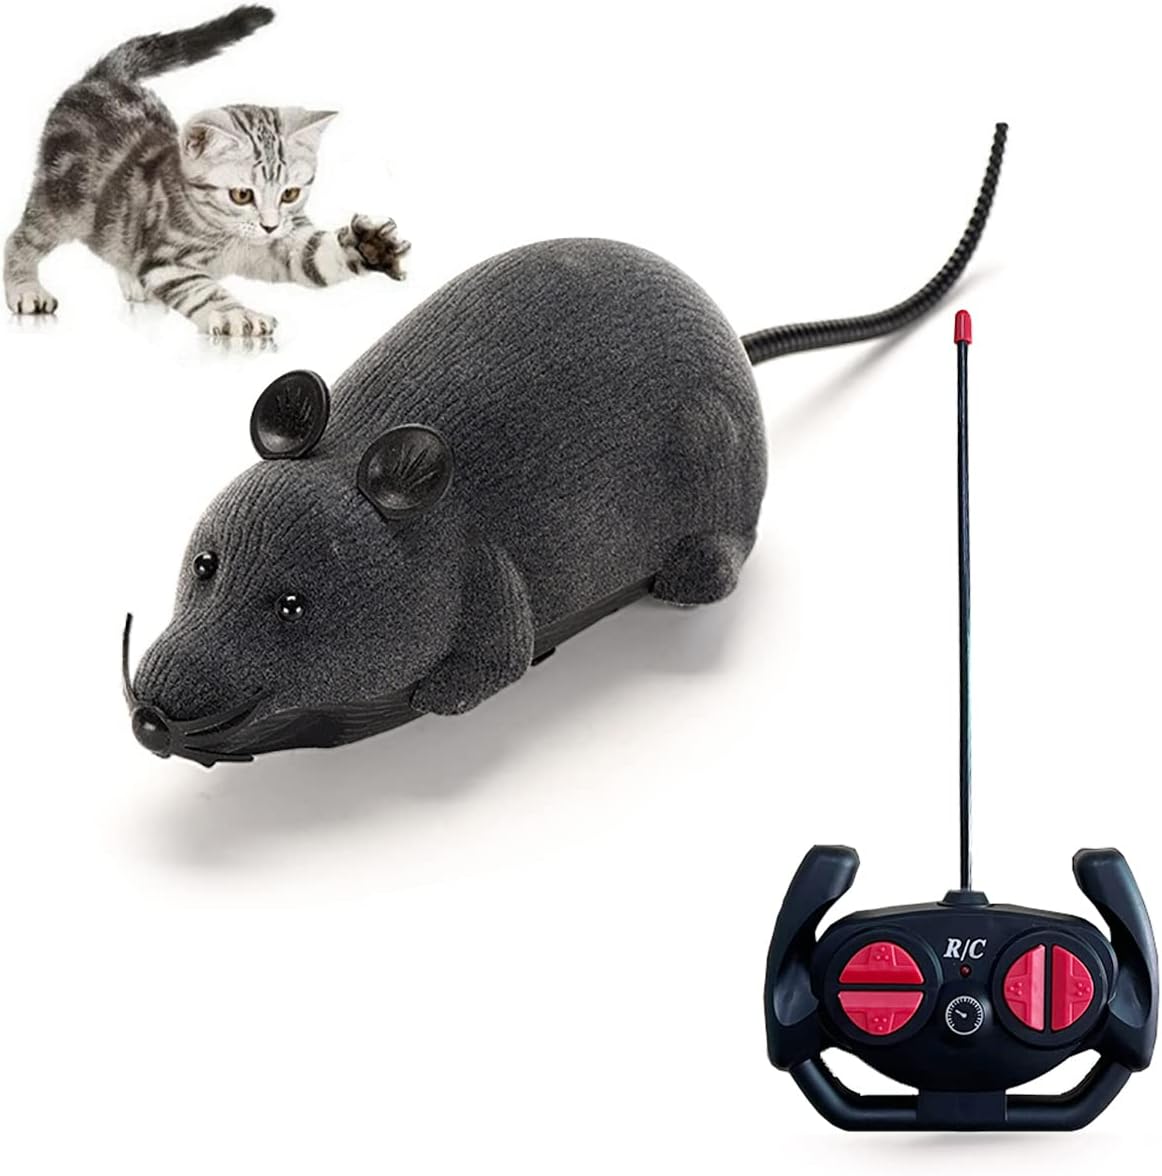 Giveme5 Remote Control Fake Rat Cat Toy